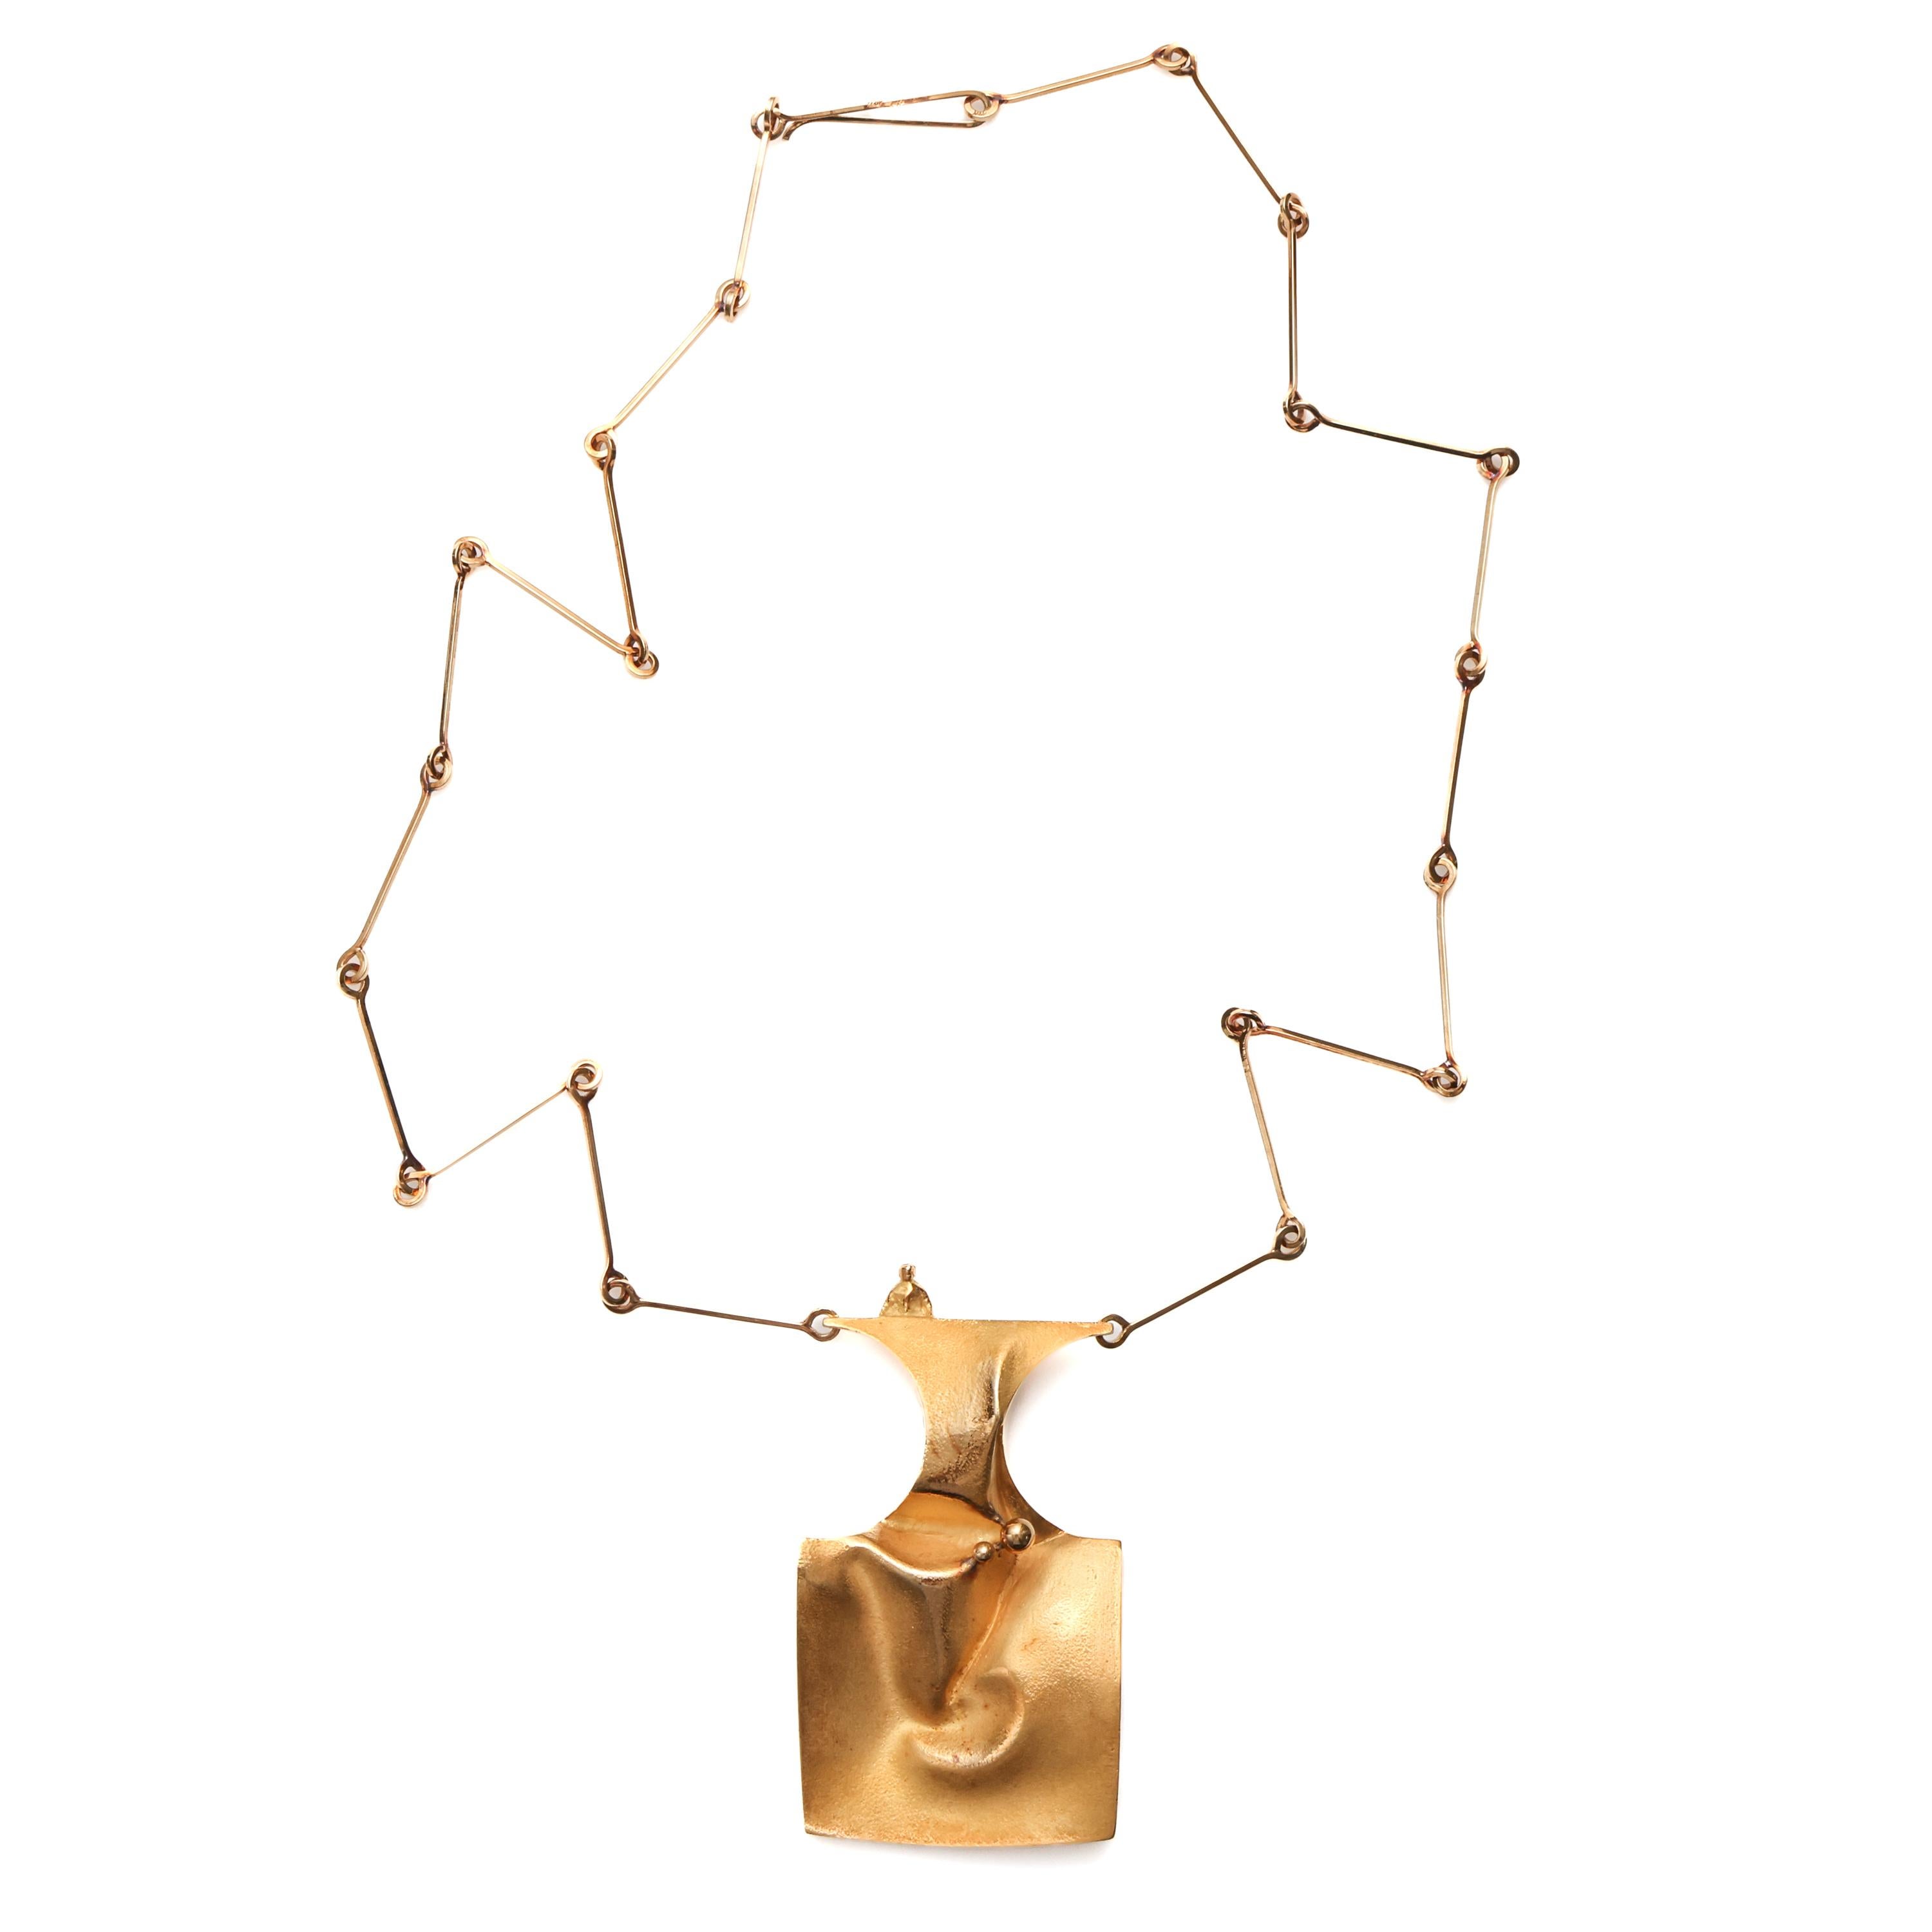 This luxurious solid (and very heavy) 18K yellow gold modernist necklace was created in the 1960s entirely by hand in South America by an unknown maker. Though the clasp is marked for metal fineness and there is a maker's mark, we are unable to